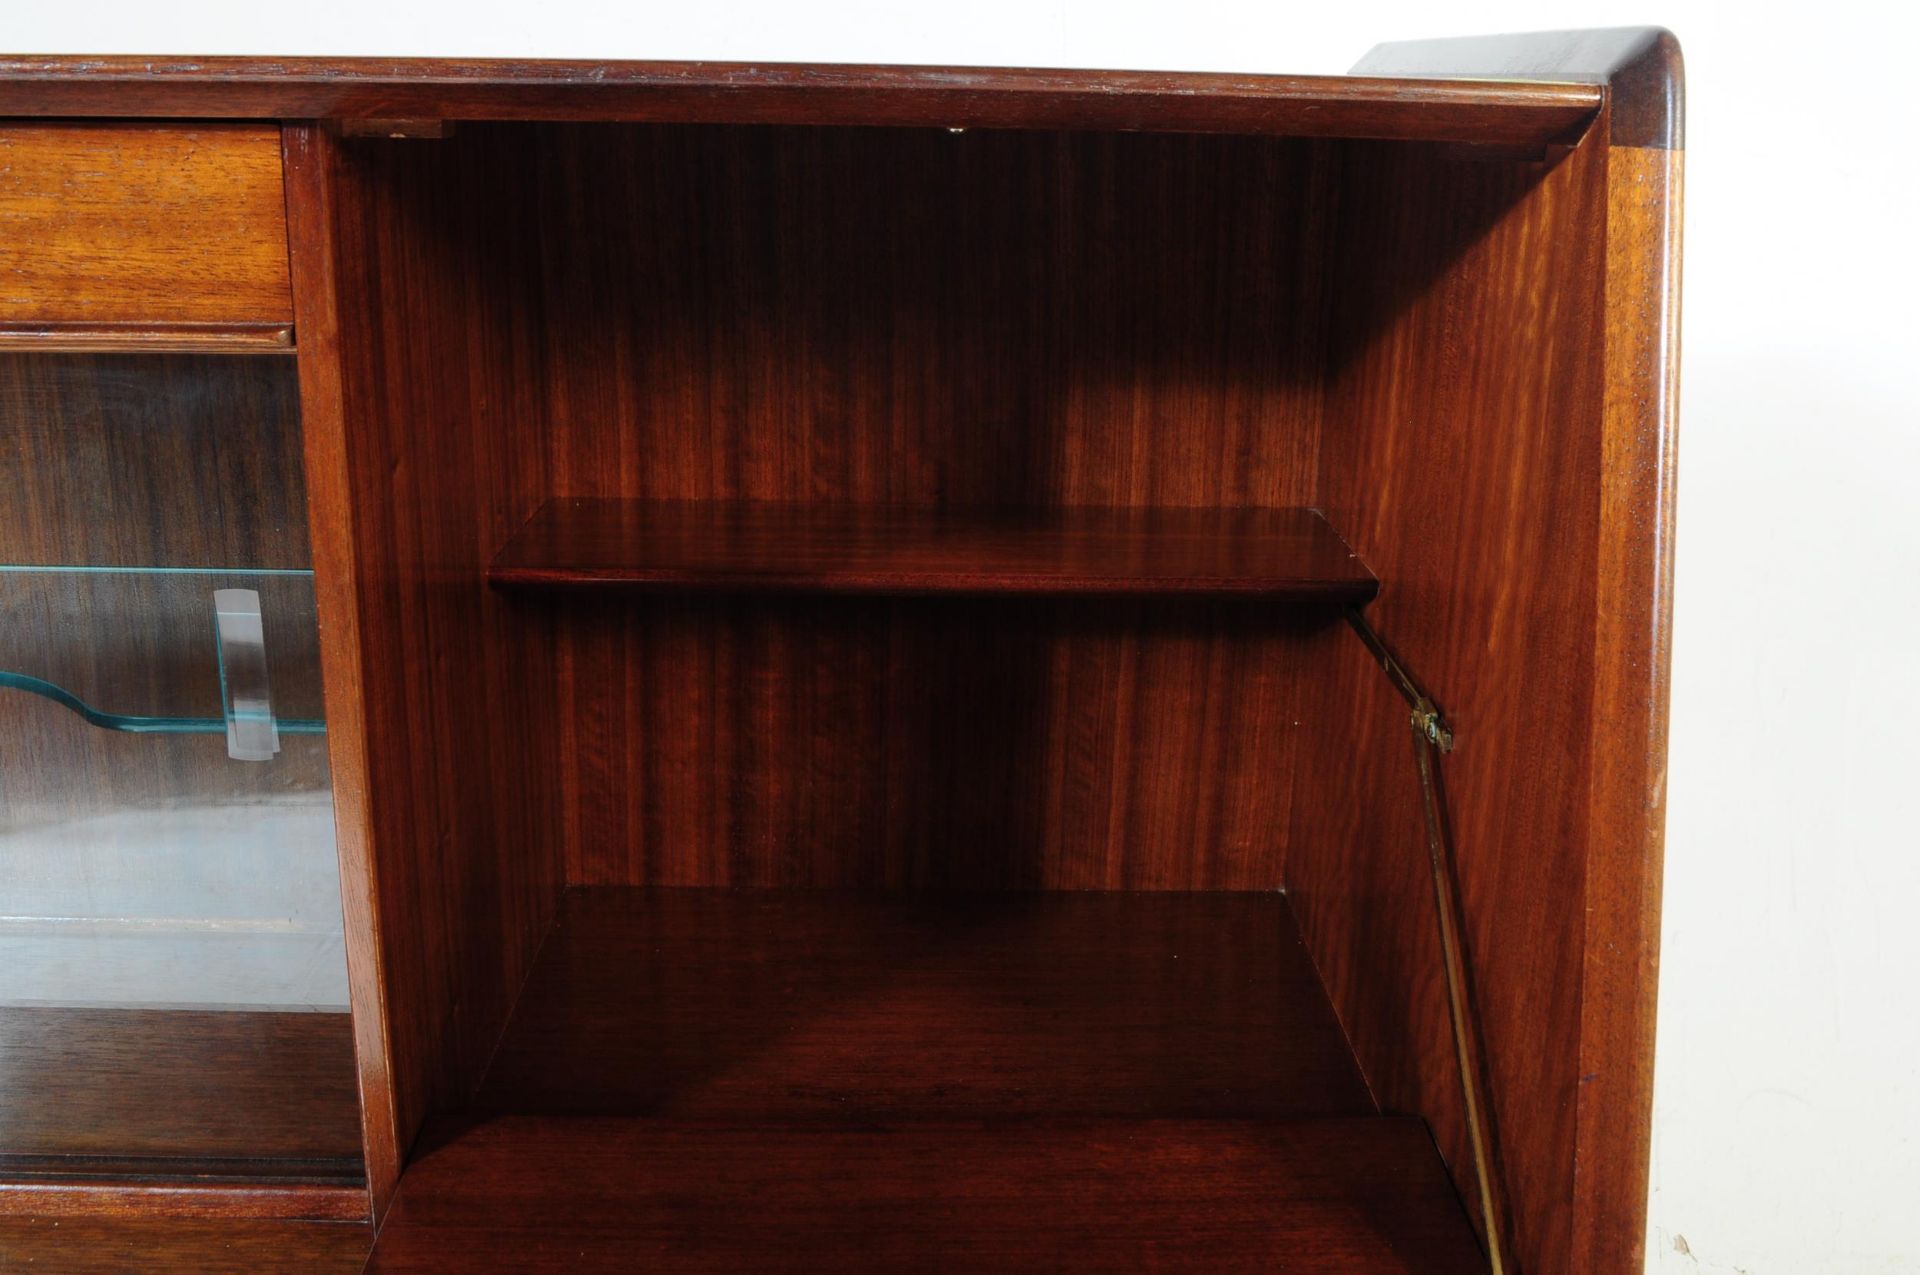 G-PLAN - MID 20TH CENTURY TEAK SIDEBOARD COCKTAIL CABINET - Image 5 of 7